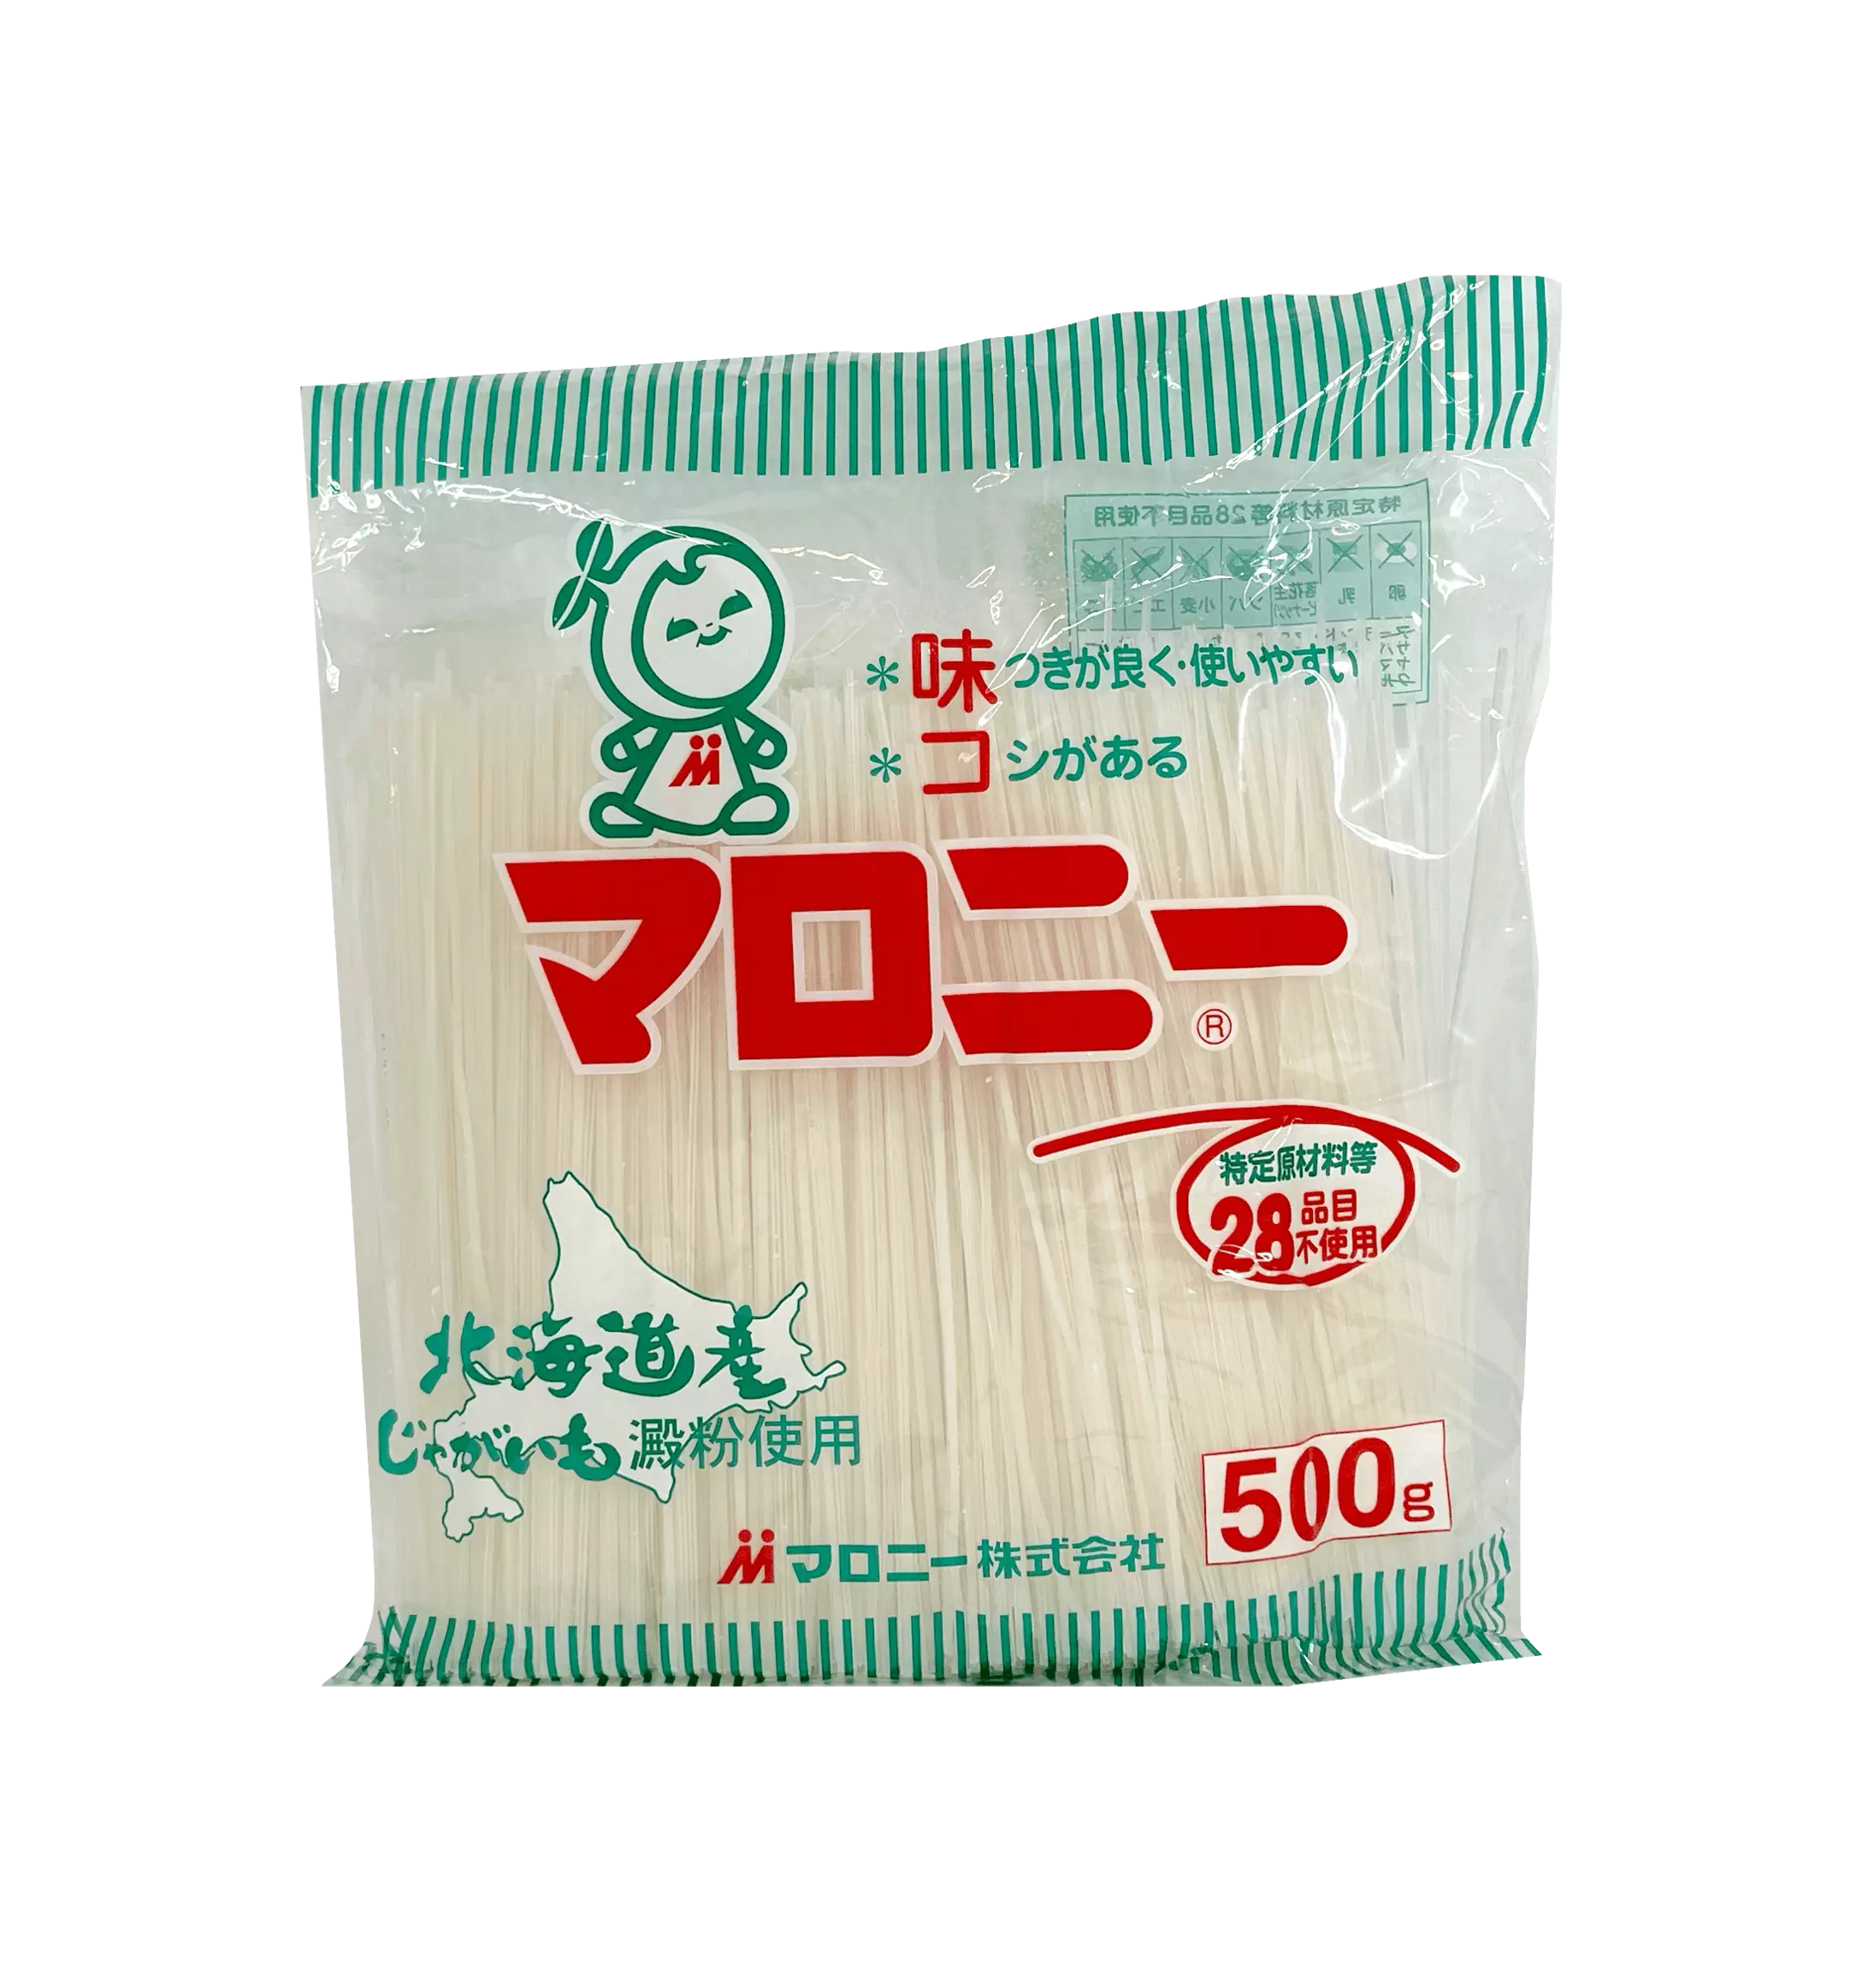 Glass noodles 500g Green Malony Harusame Japan